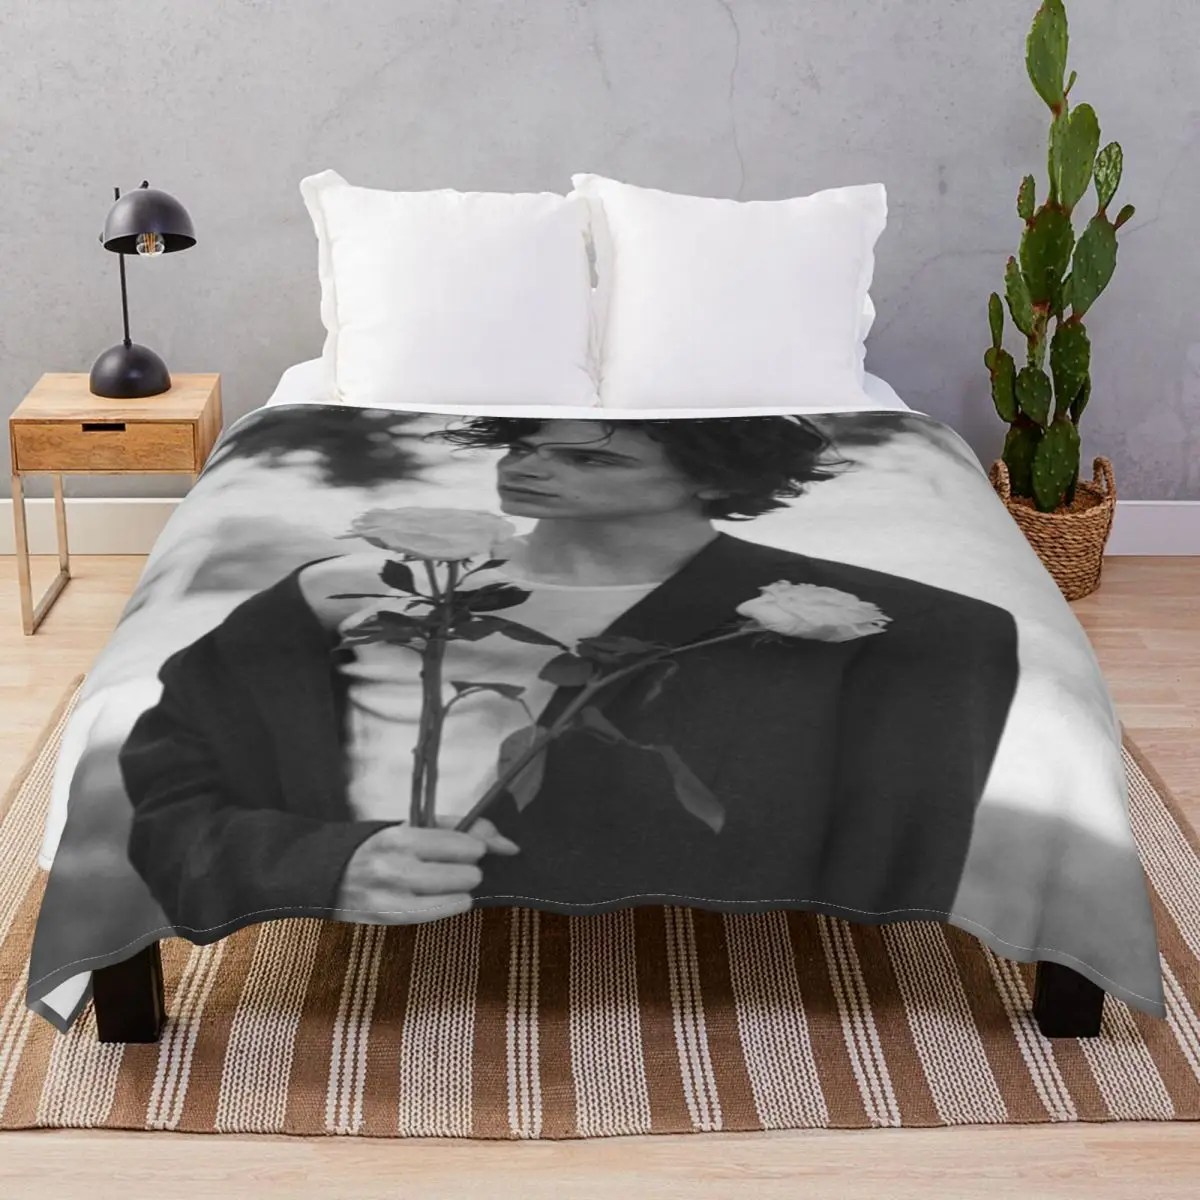 Timothee Chalamet Blanket Flannel Summer Multi-function Throw Blankets for Bed Home Couch Camp Office